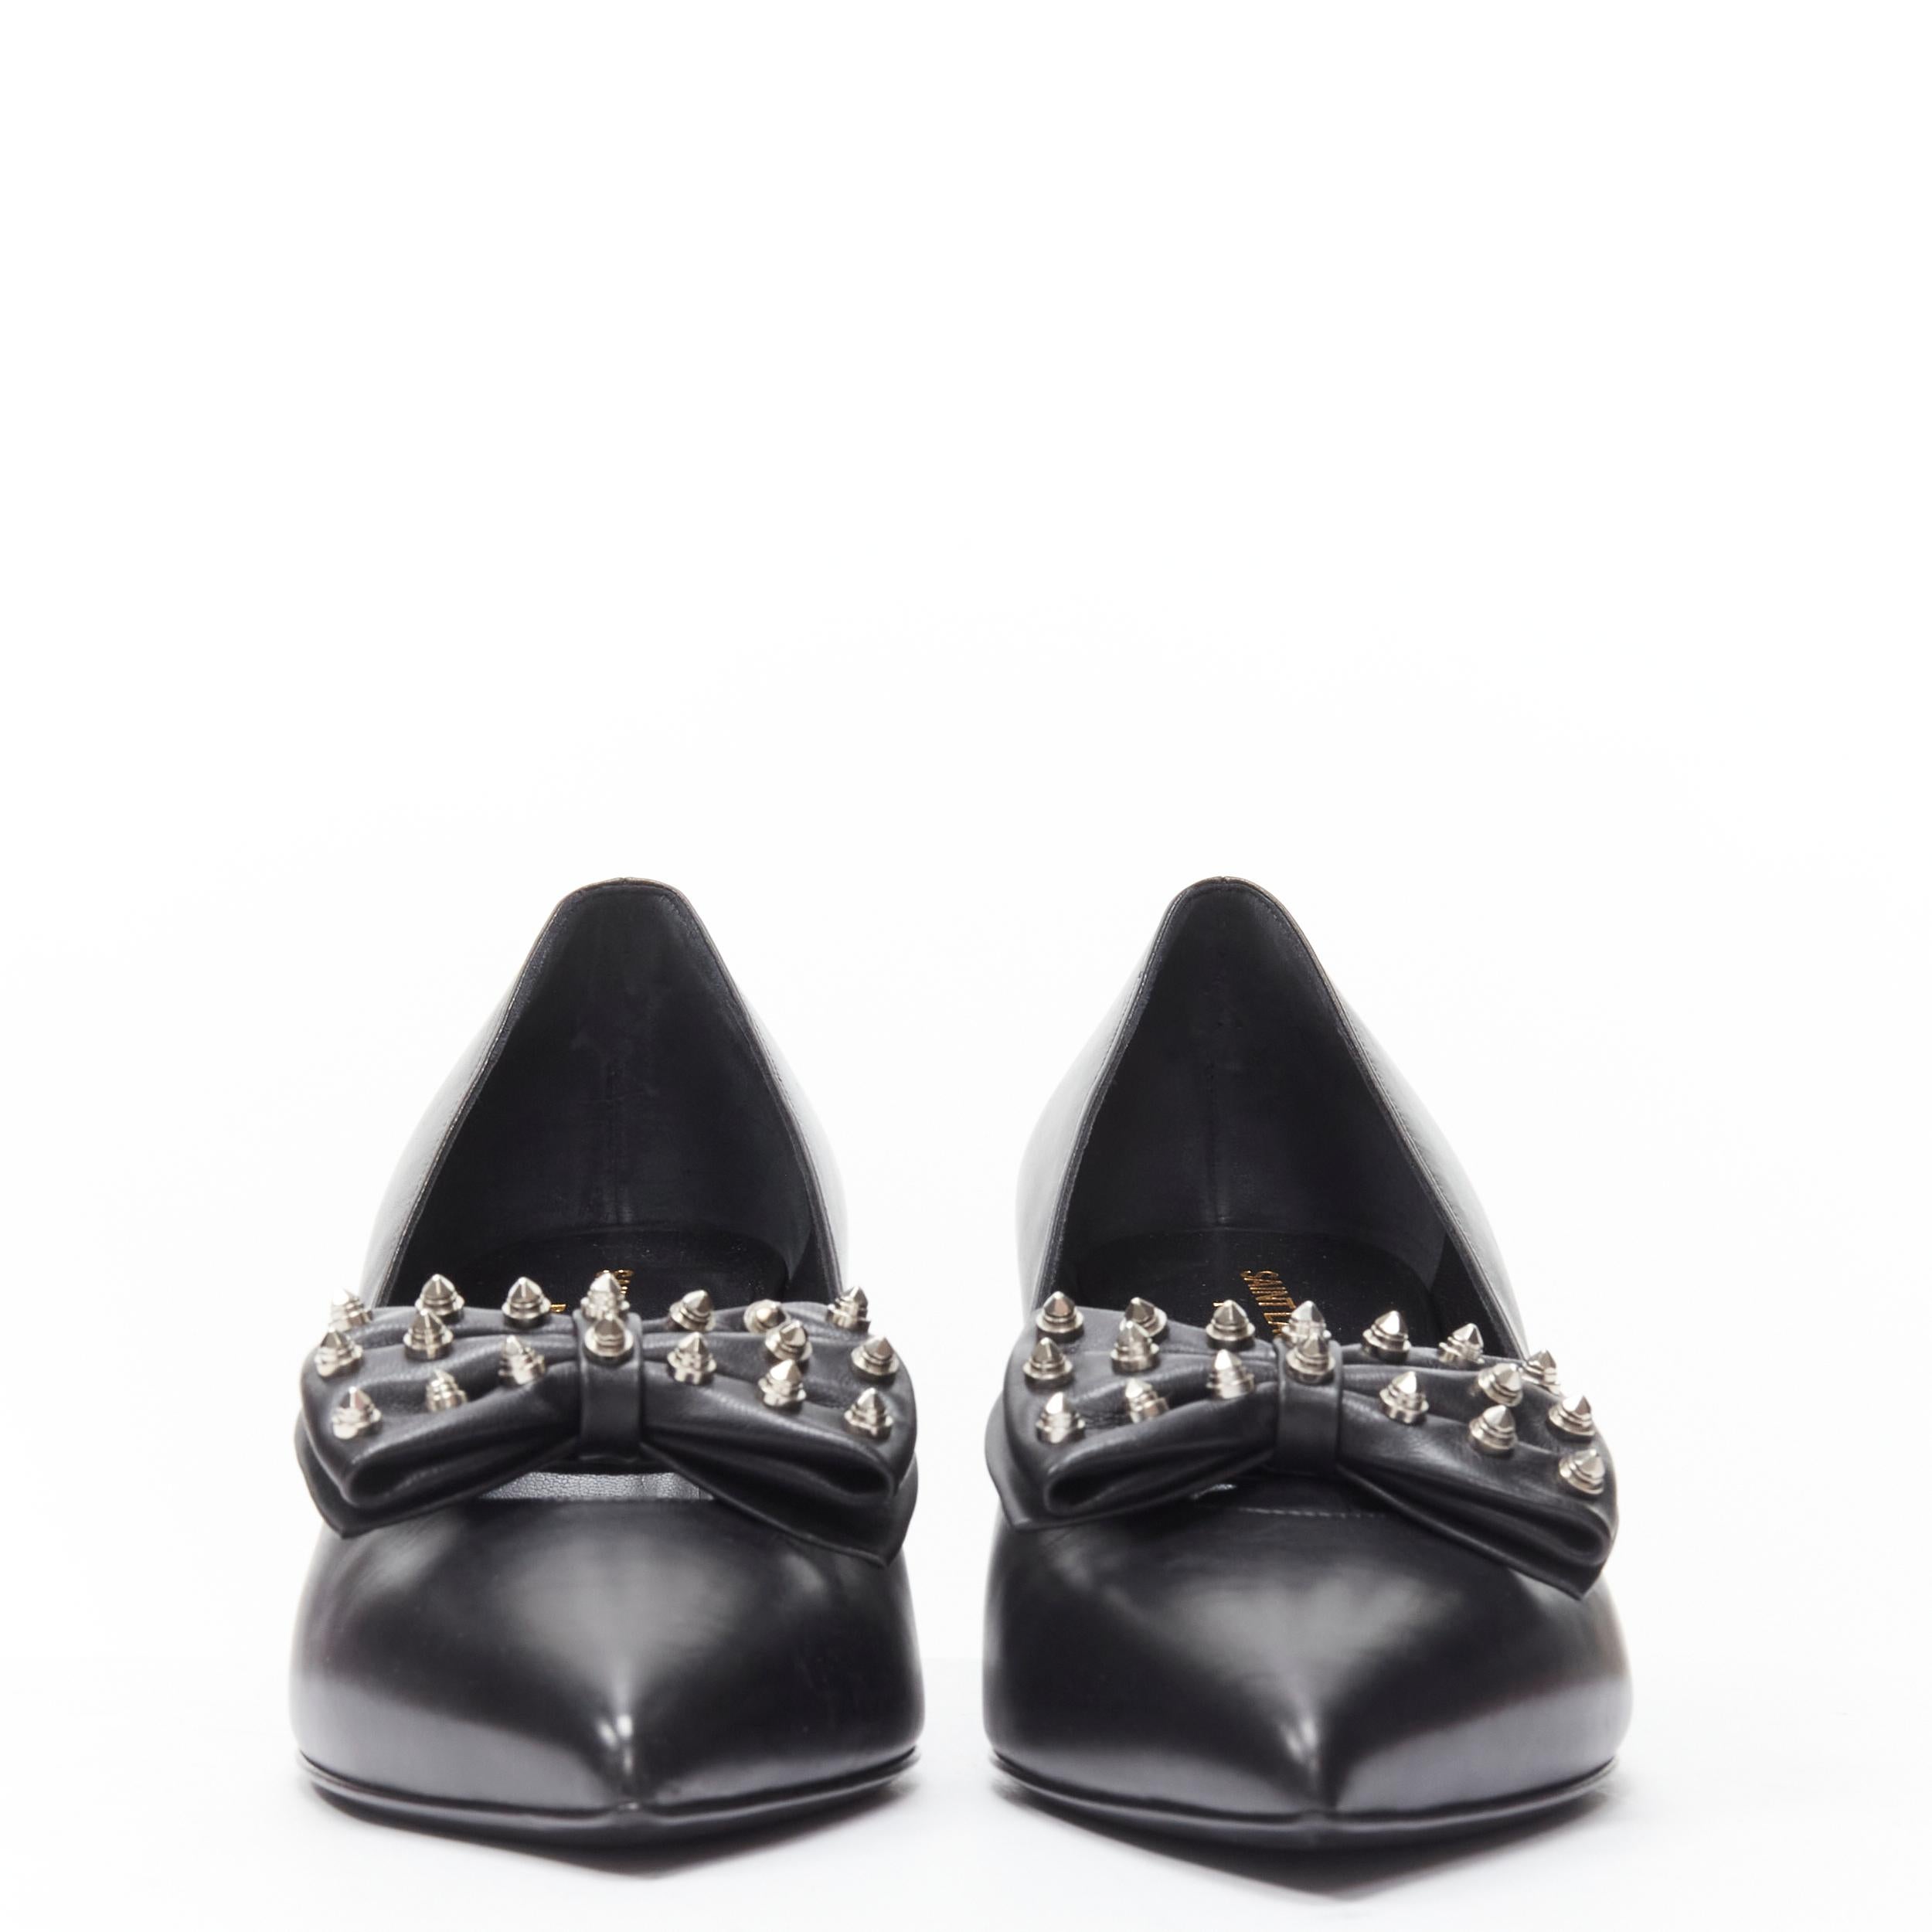 SAINT LAURENT silver spike studded bow point toe pump EU37 
Reference: MELK/A00207 
Brand: Saint Laurent 
Material: Leather 
Color: Black 
Pattern: Solid
Made in: Italy 

CONDITION: 
Condition: Excellent, this item was pre-owned and is in excellent